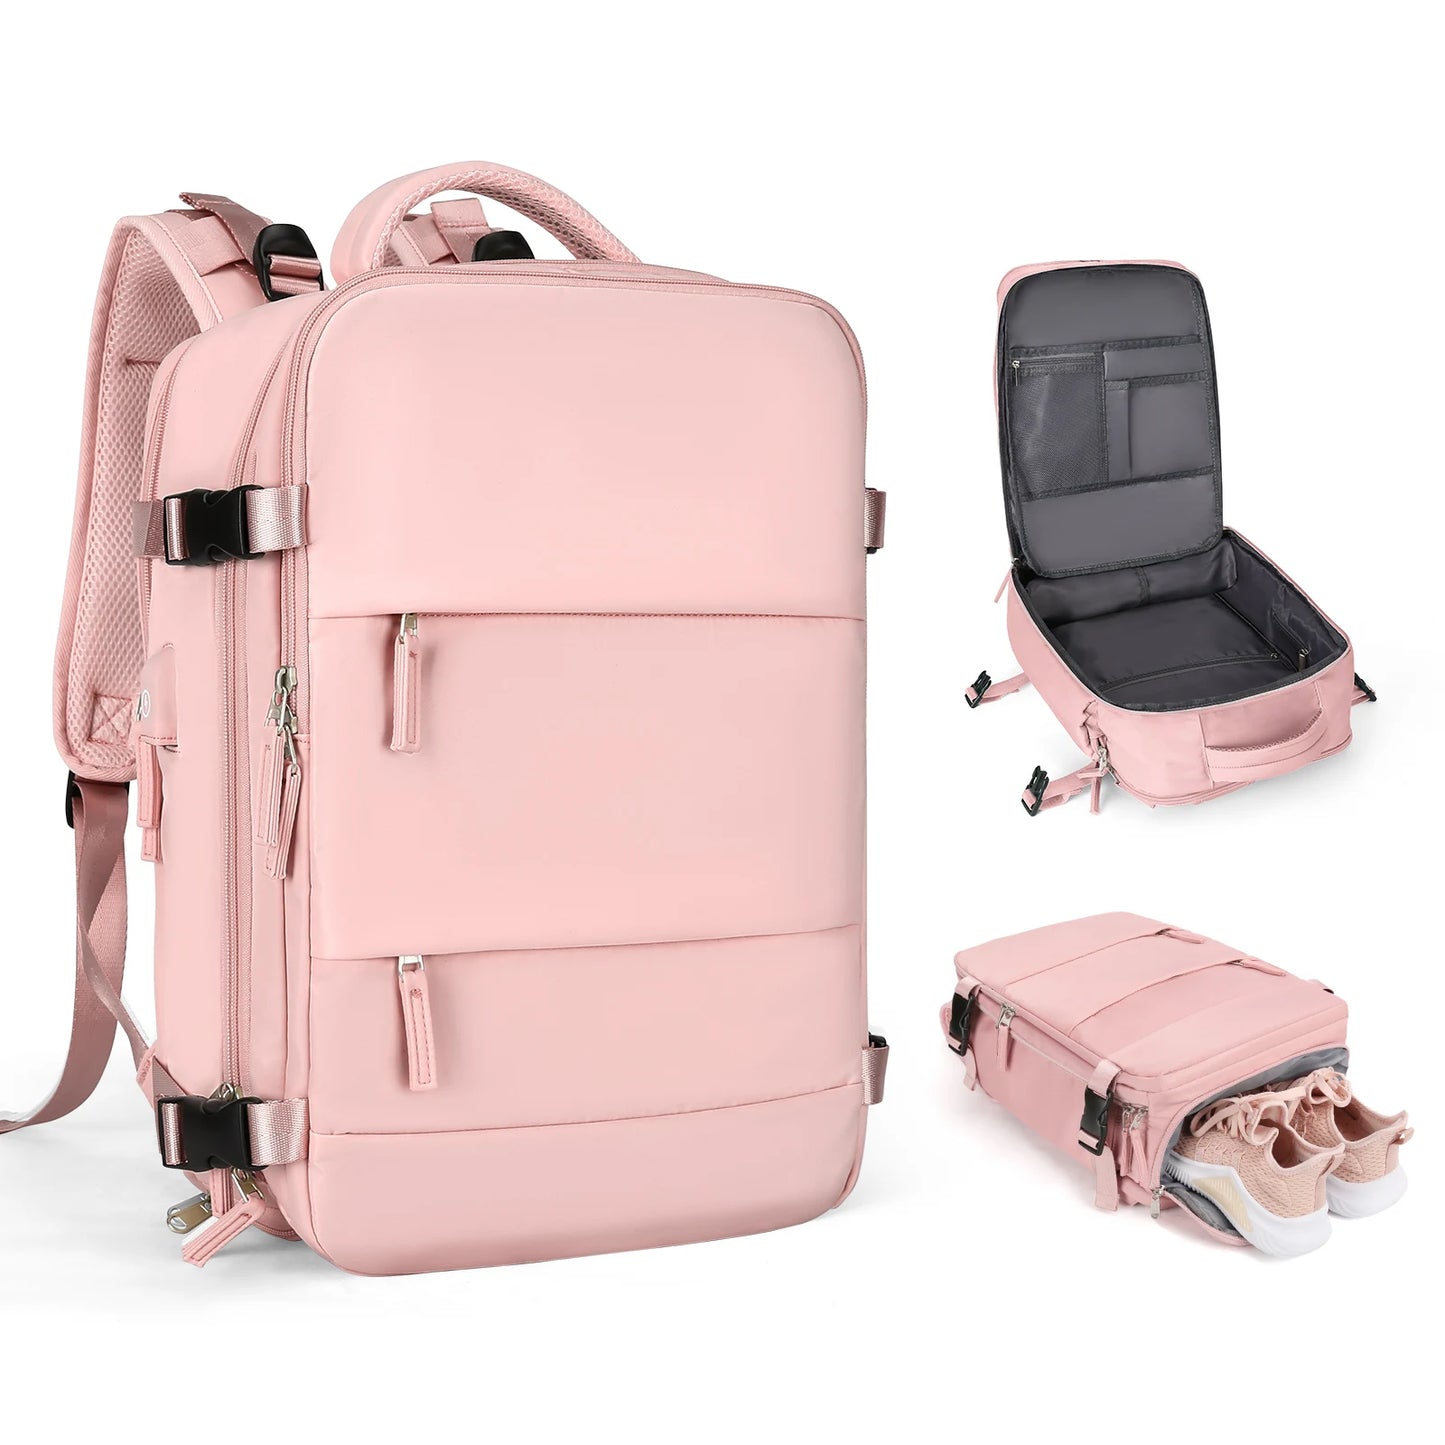 Dusty Pink travel backpack personal item with wet dry pocket laptop sleeve usb charger and shoe sleeve